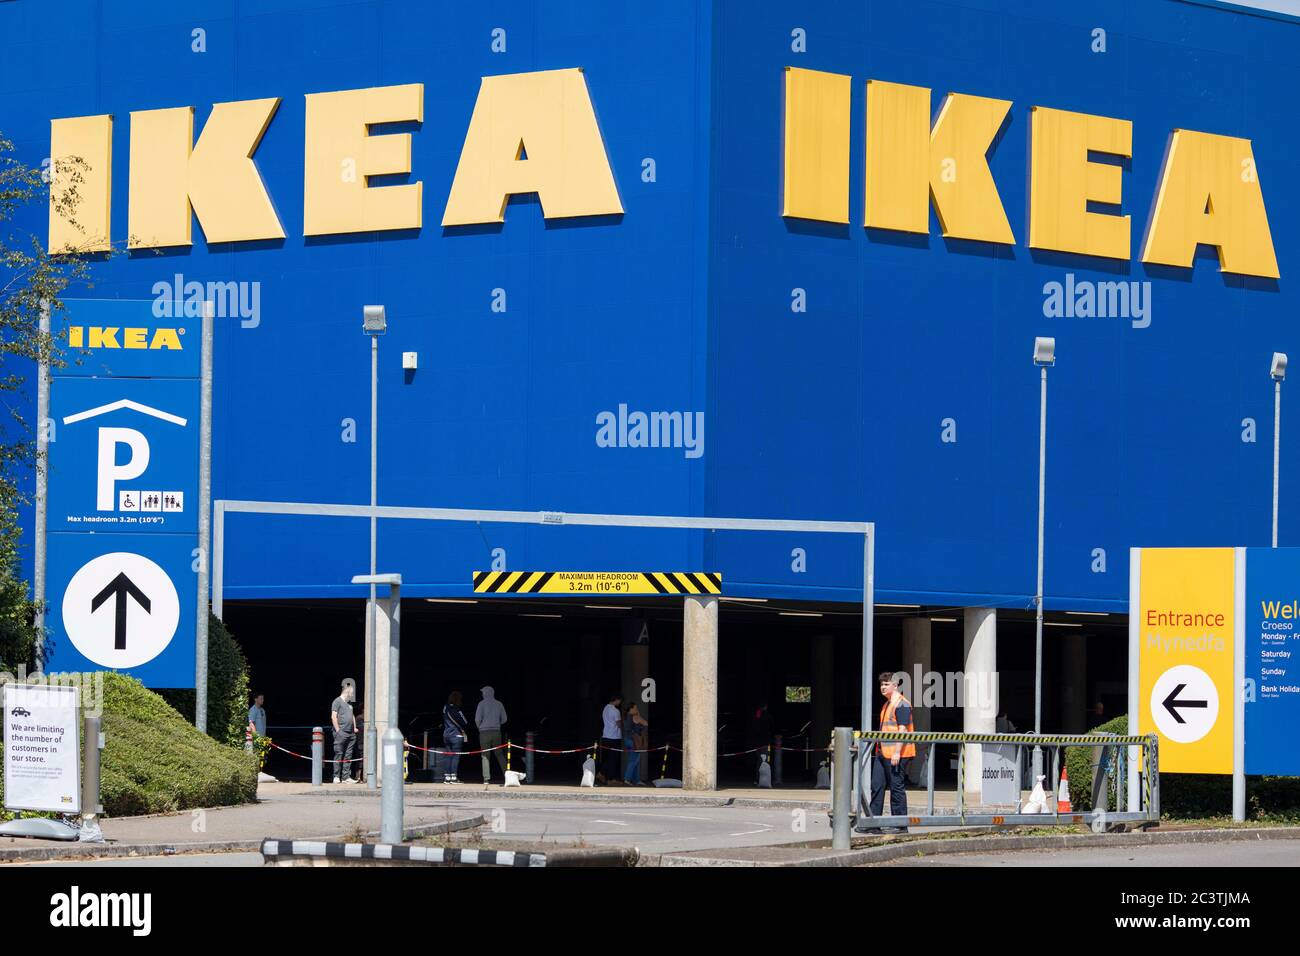 Cardiff, Wales, UK. 22nd June, 2020. A parking attendant and queuing  shoppers as the Cardiff Ikea store reopens after the coronavirus lockdown.  Credit: Mark Hawkins/Alamy Live News Stock Photo - Alamy